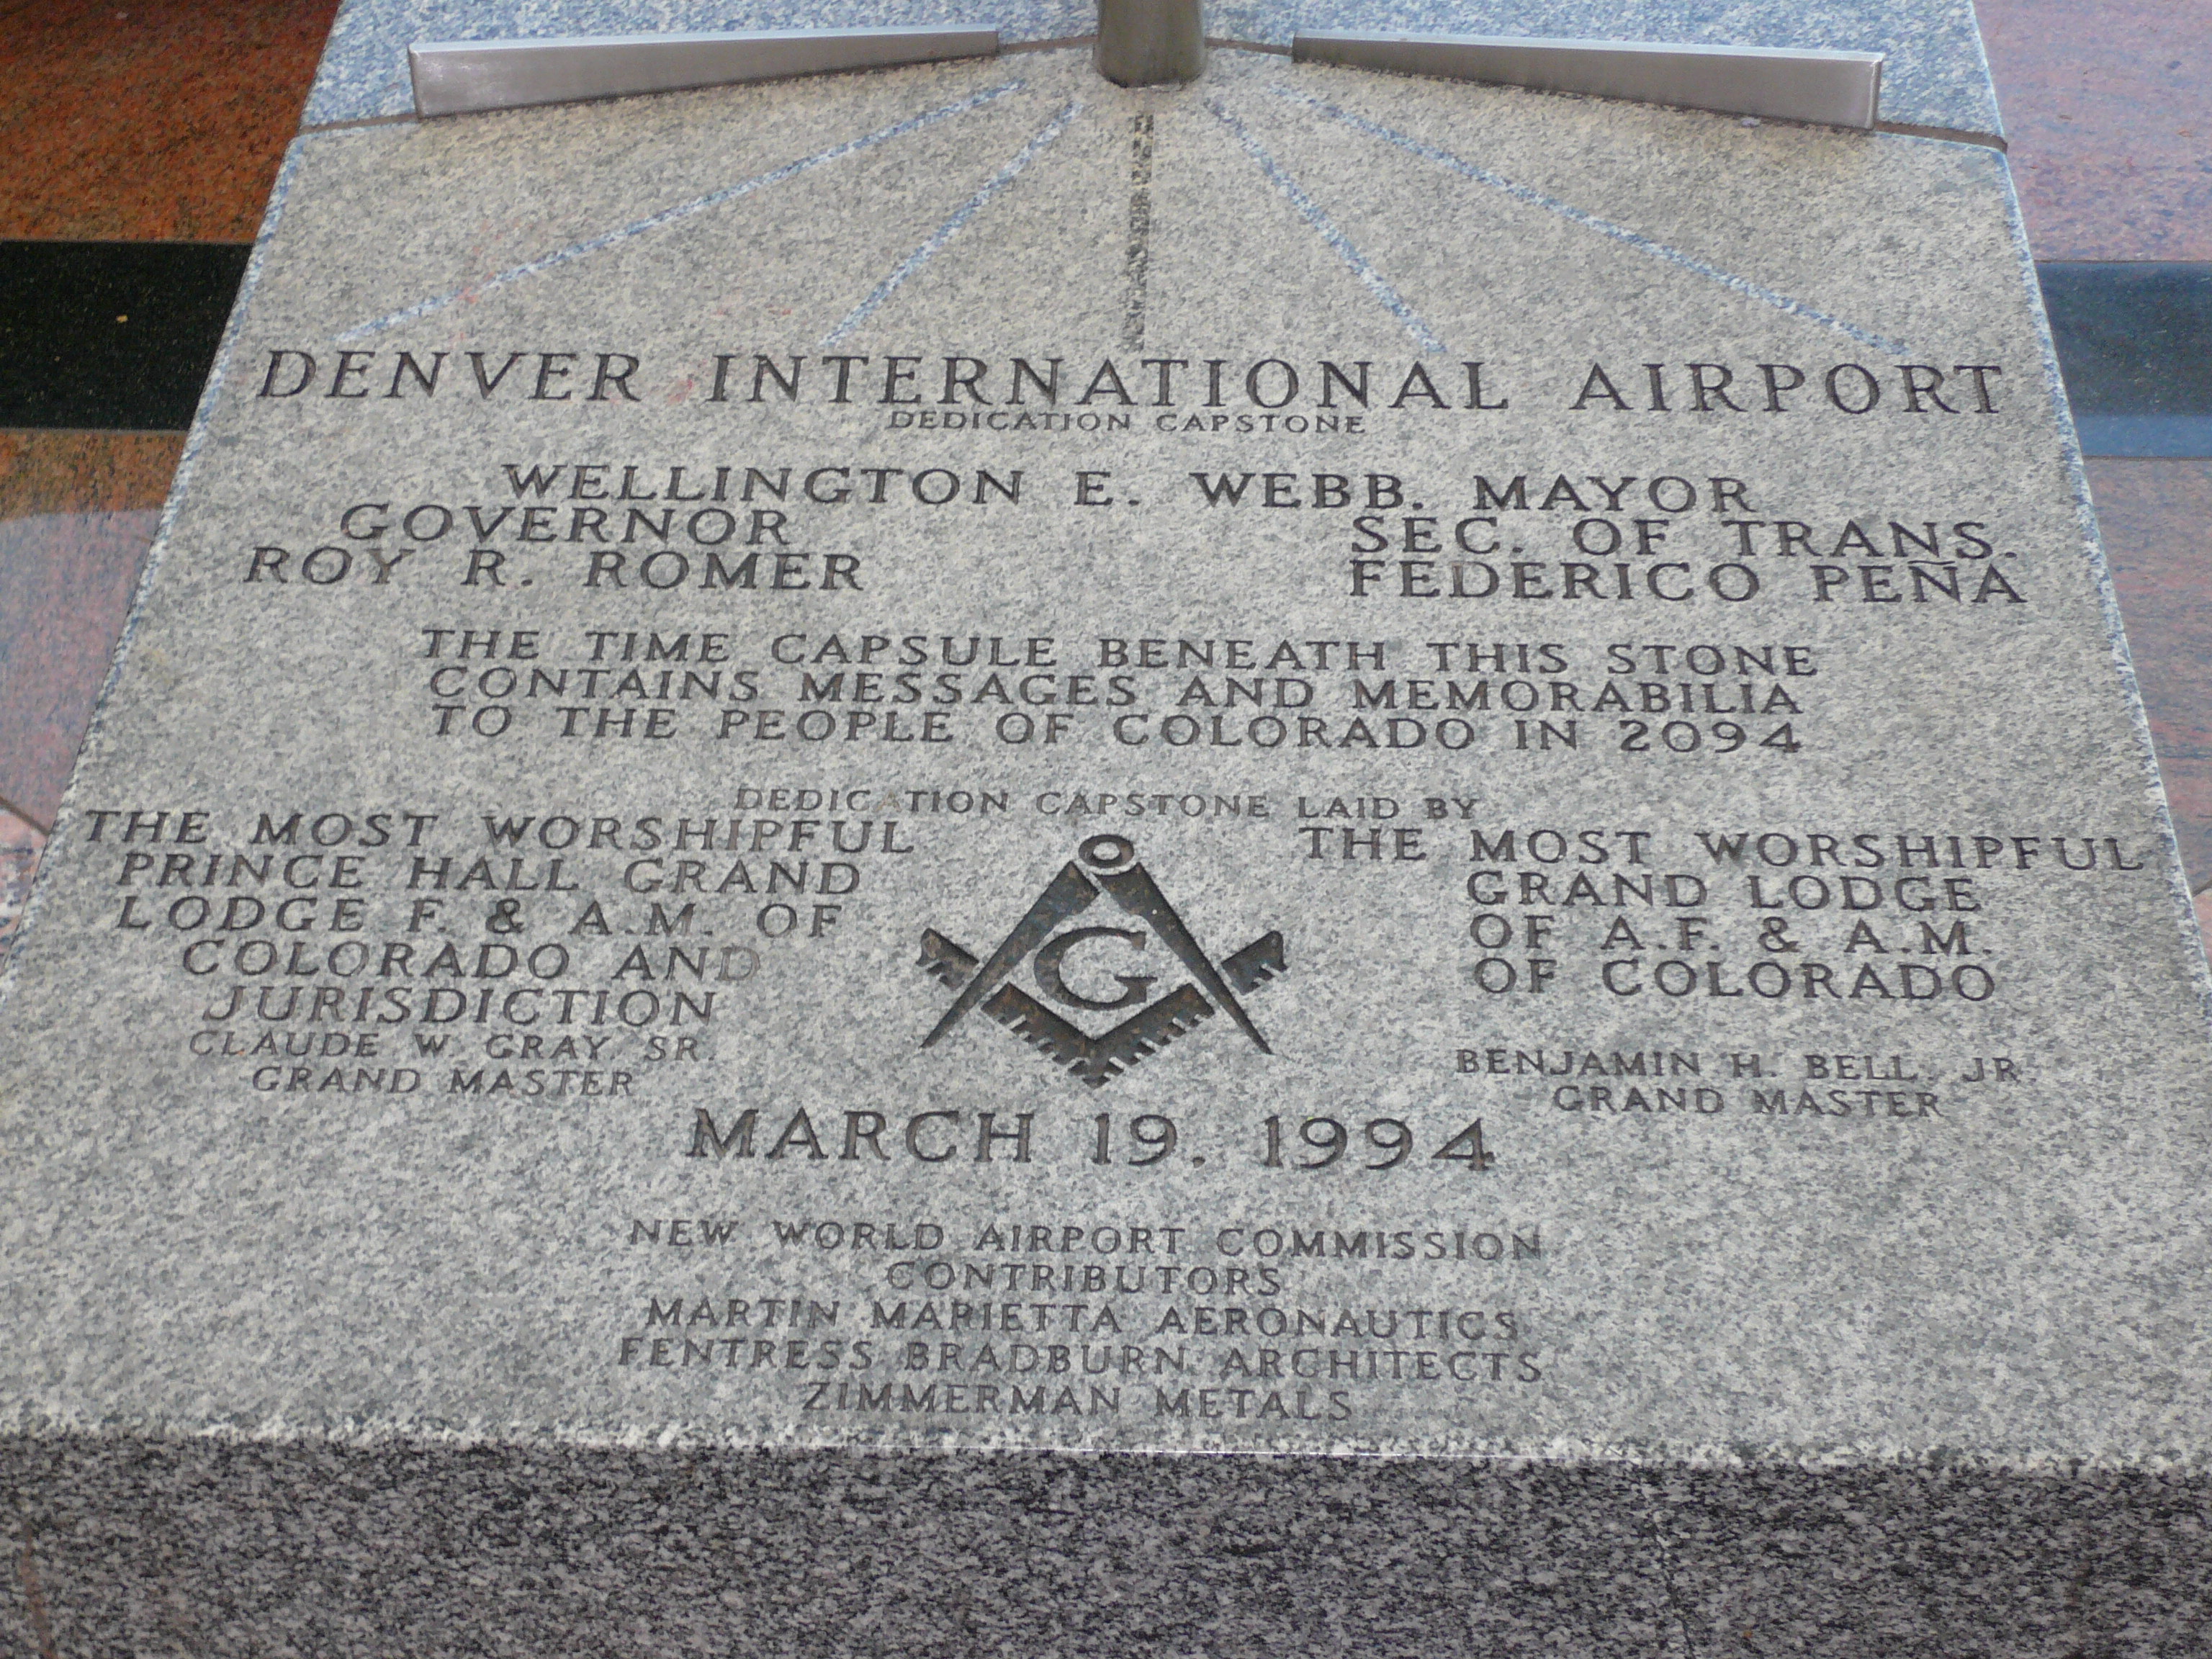 Anyone know why the denver airport has the Freemason symbol on their